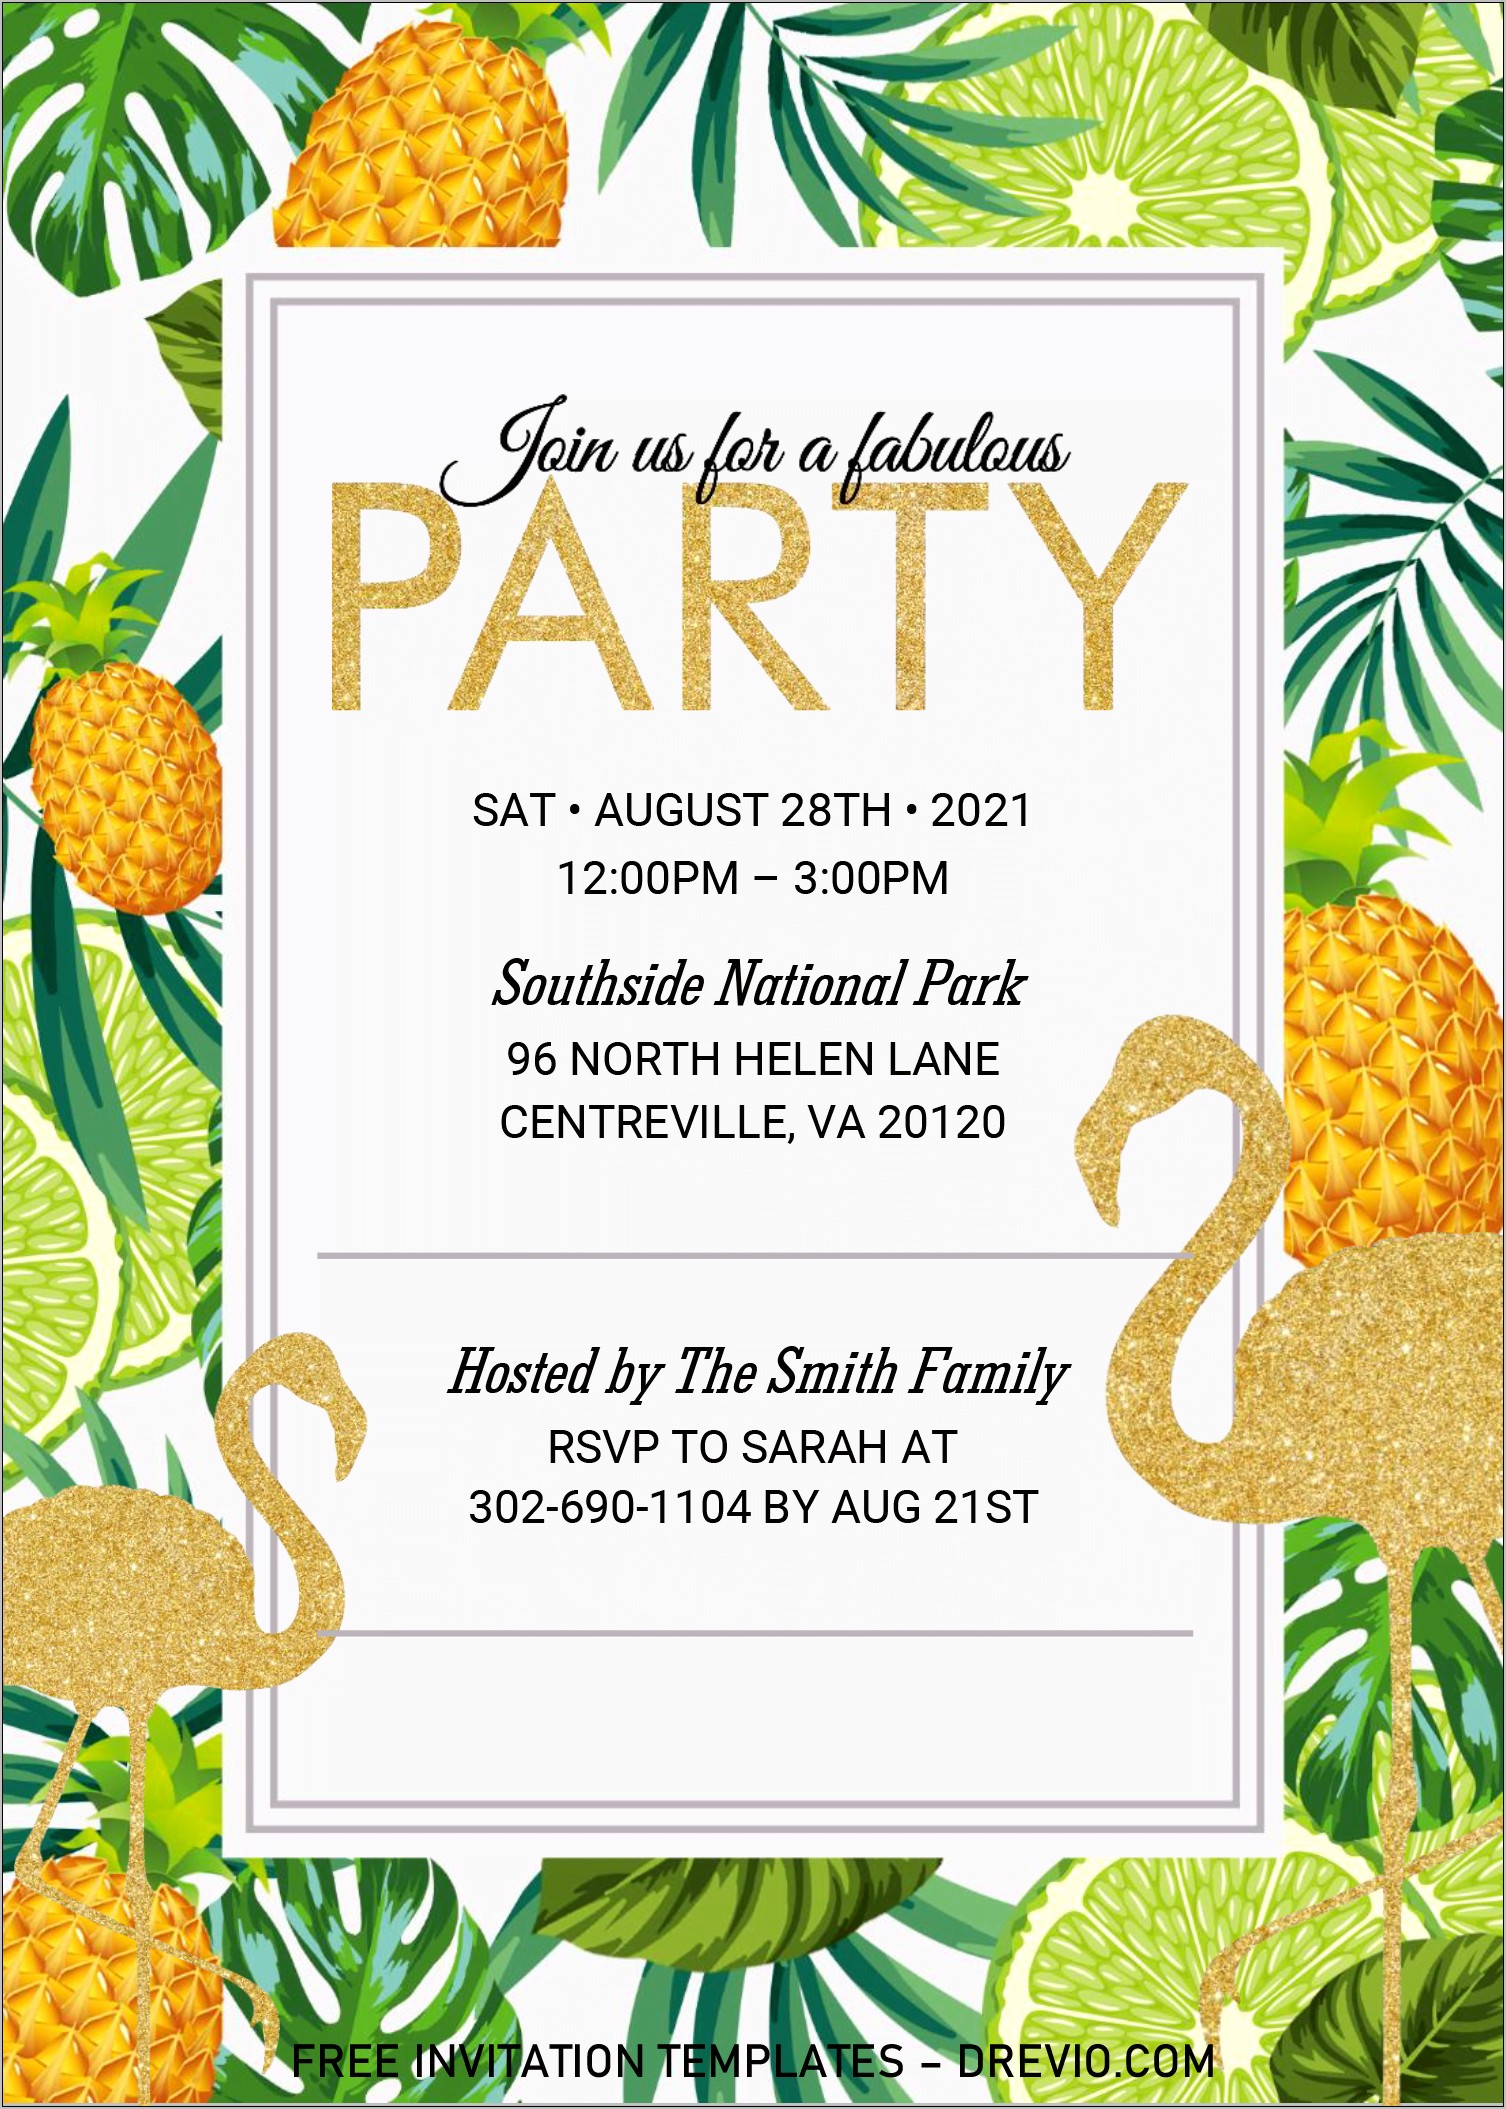 free-party-invitation-templates-microsoft-word-resume-example-gallery